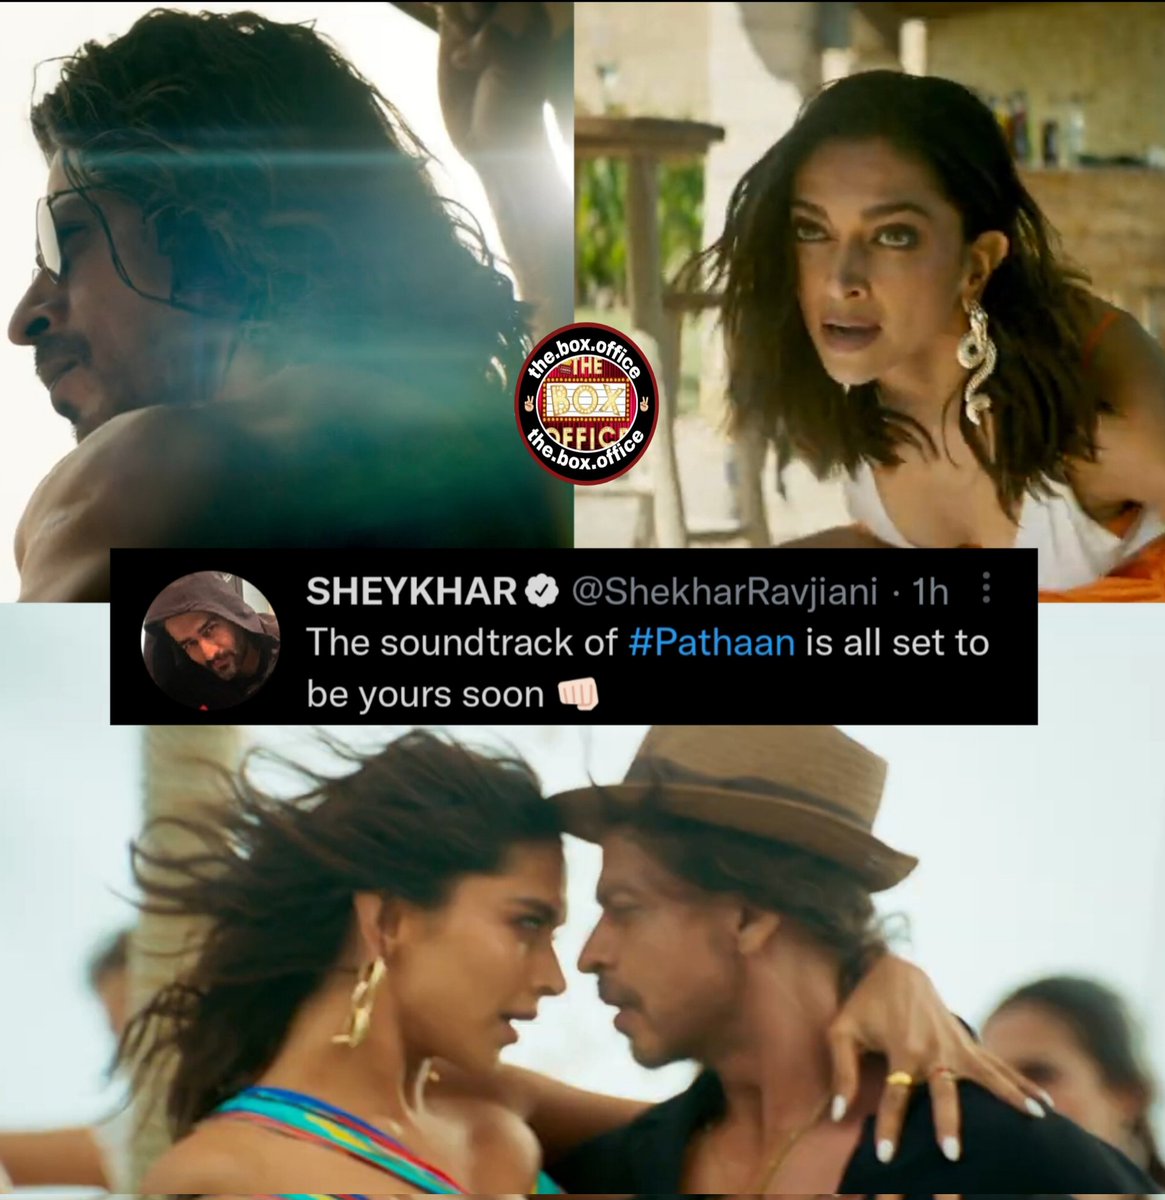 CAN'T WAIT 🔥

As per reports, the first song of #Pathaan titled as #BesharamRang or #NashaChada, featuring #ShahRukhKhan and #DeepikaPadukone will be out on 25 November 2022...Sung by #ArijitSingh and #ShilpaRao, Lyrics by #Kumaar and composed by #VishalShekhar.